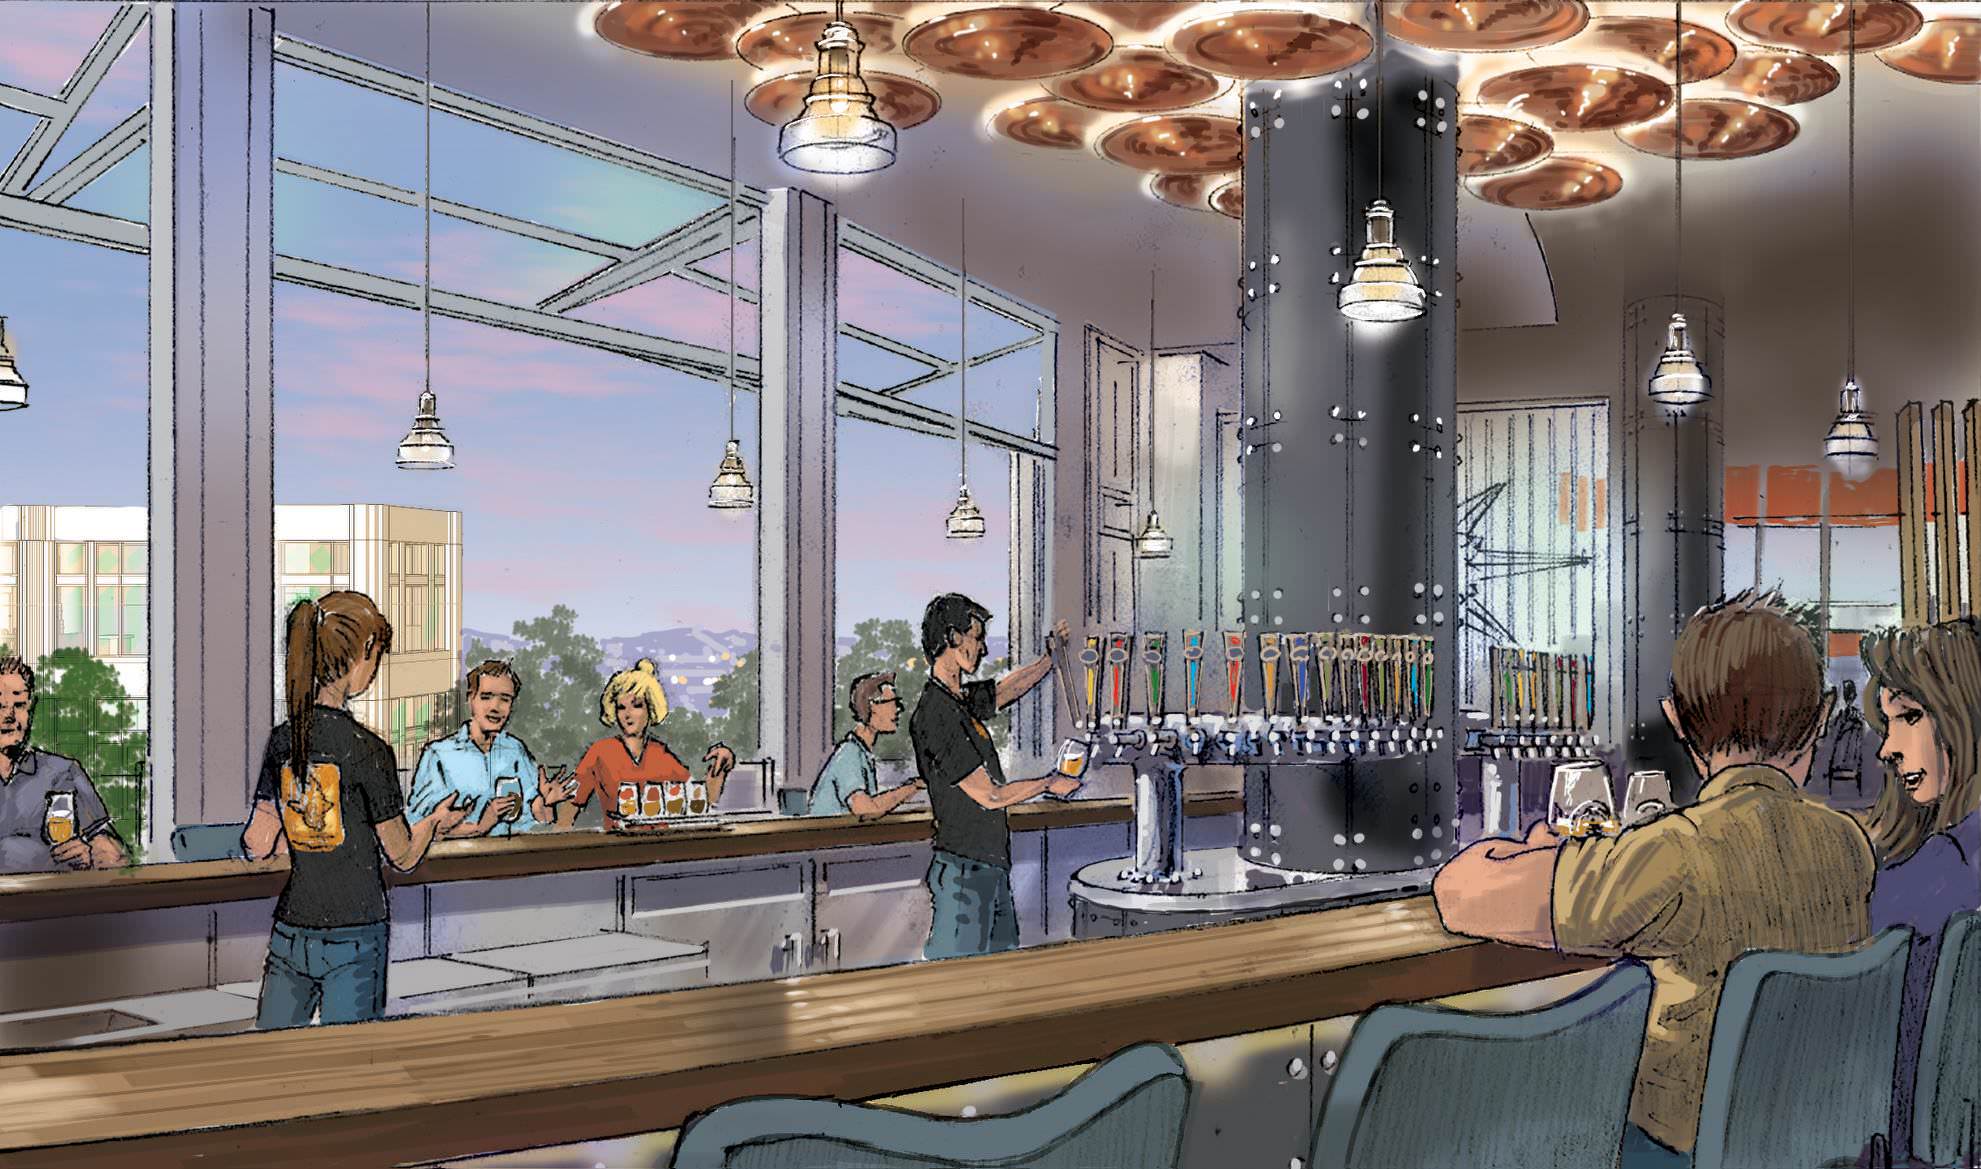 Ballast Point Brewing to Open in Downtown Disney District at the Disneyland Resort